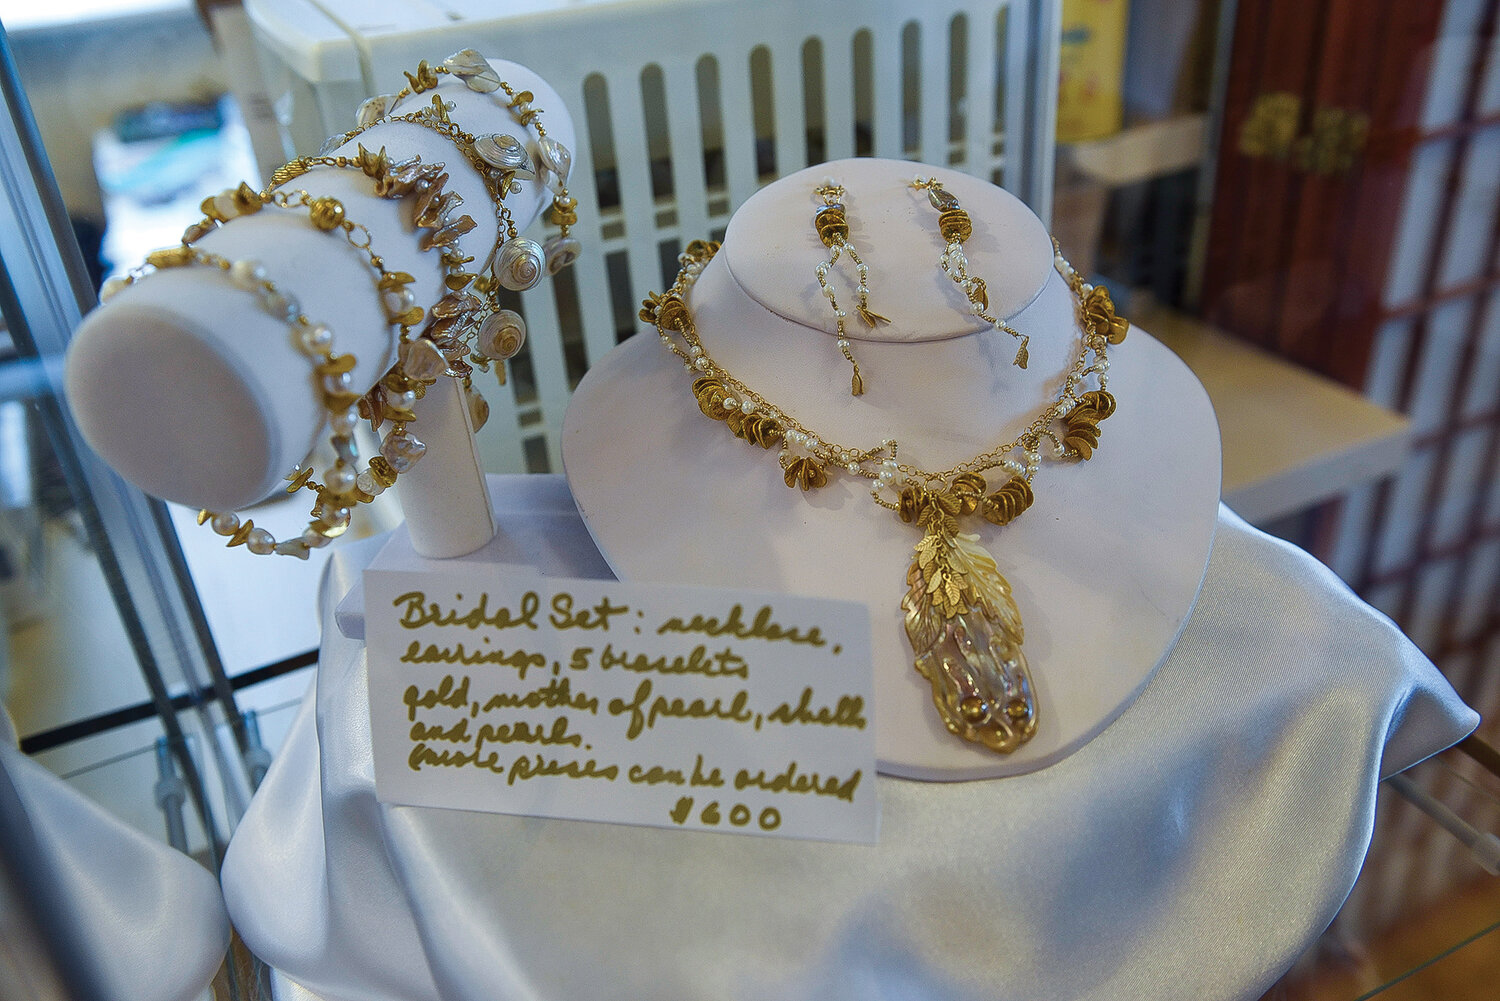 Jewelry artist Lois Steiner created this piece, featuring delicate gold leaves, shells and pearls.